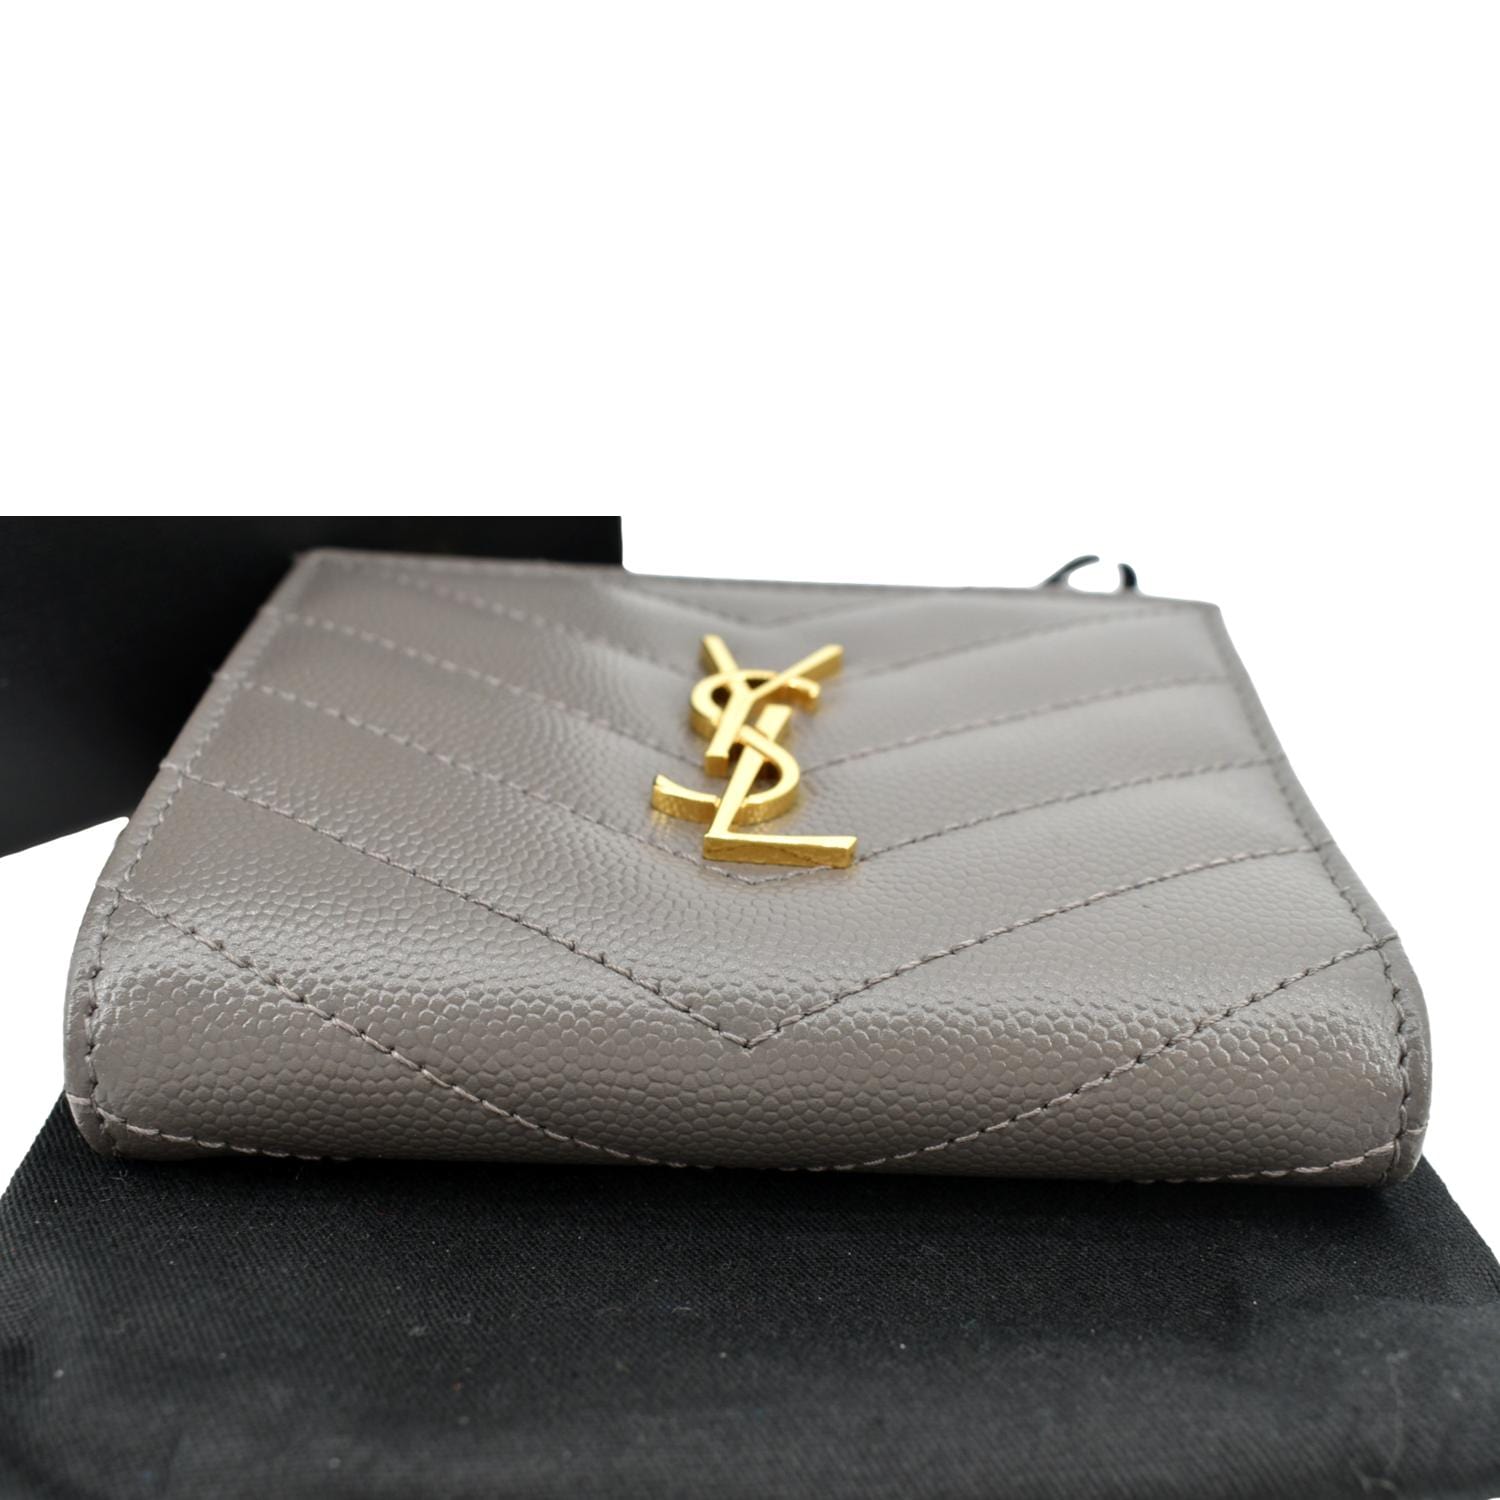 YSL Red Grainy Leather Zip Around Wallet QTADVD18RB003